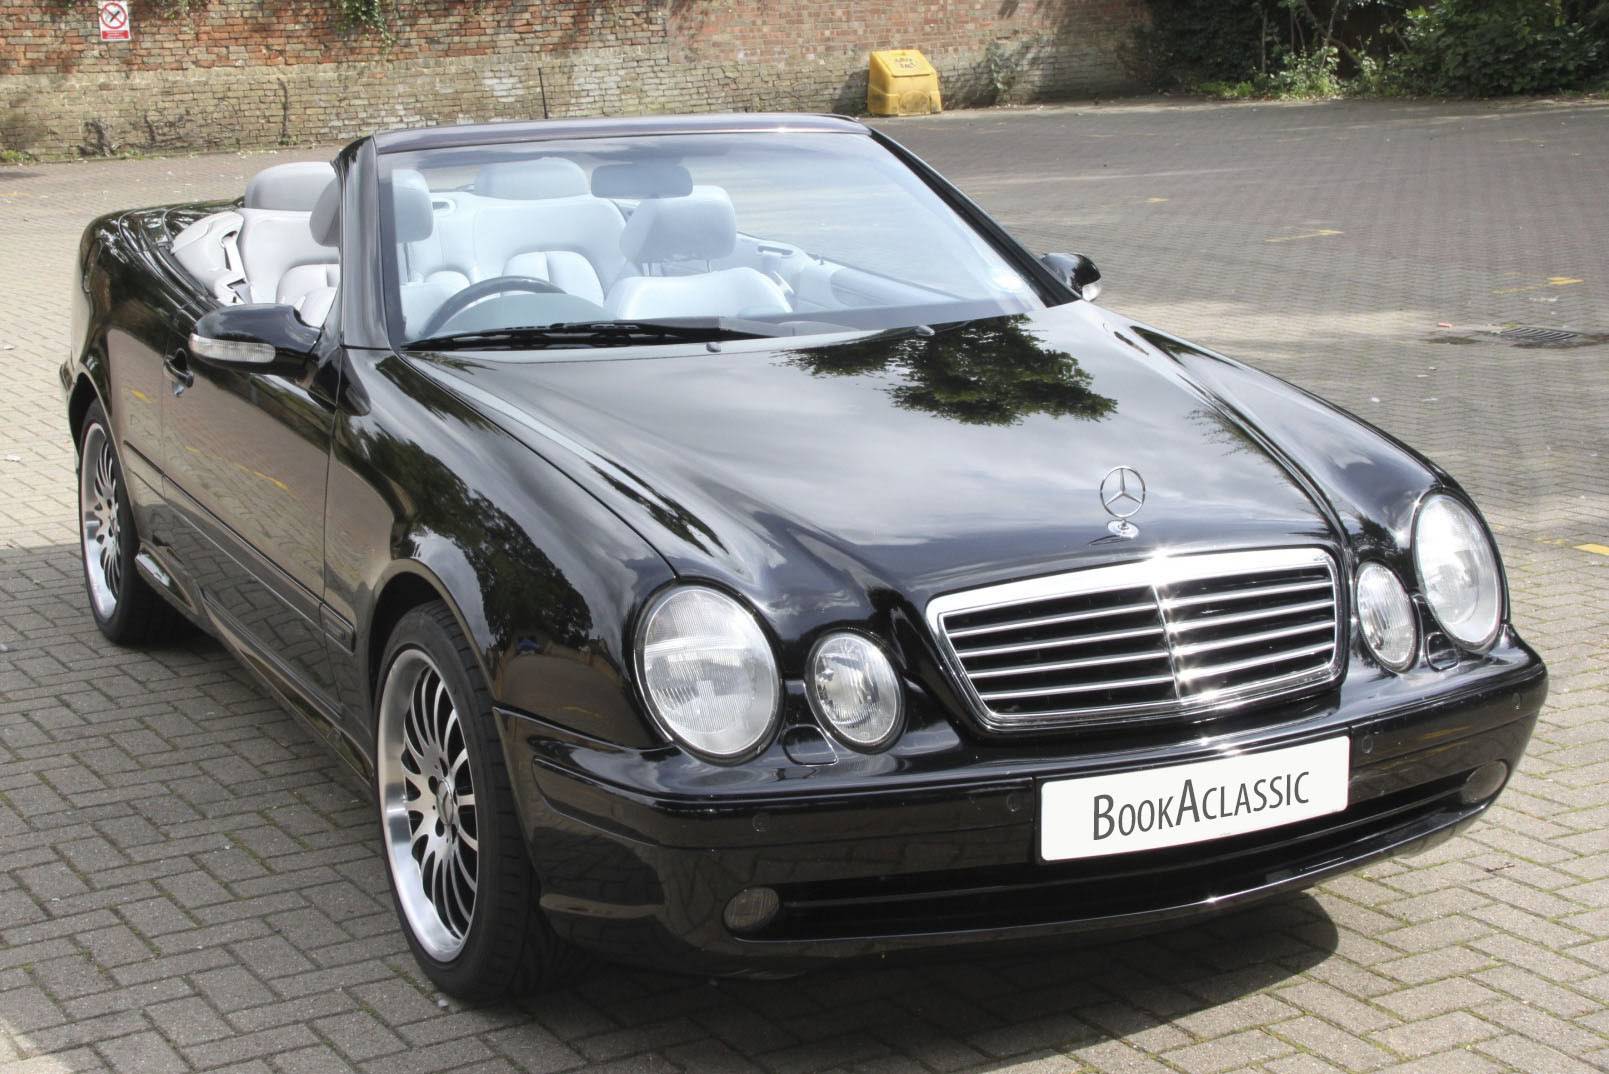 Mercedes-Benz Clk 430 for hire in Ely - BookAclassic